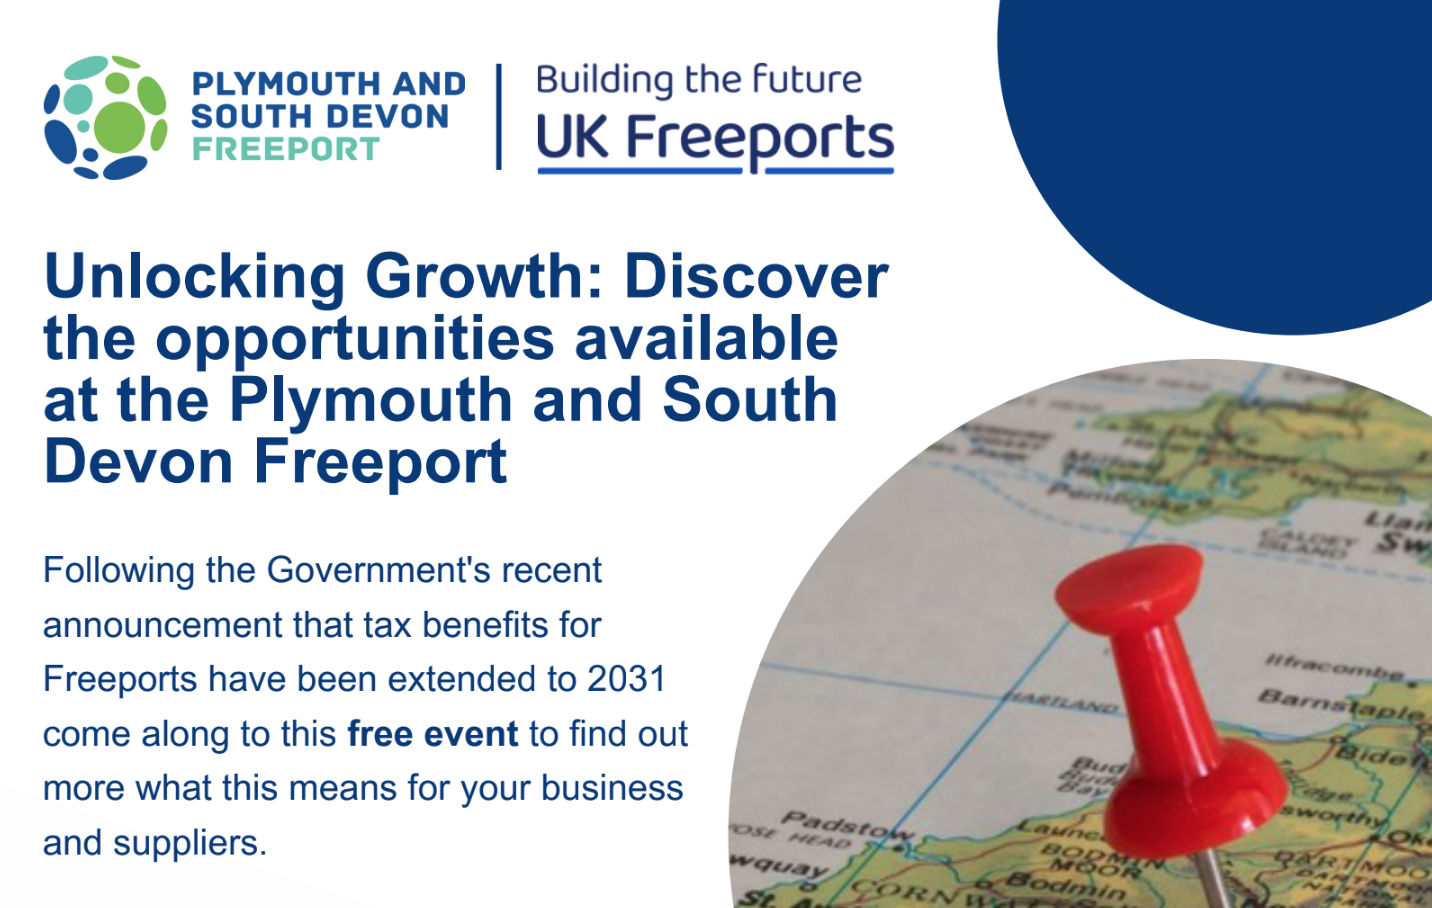 Unlocking Growth: Discover the opportunities available at the Plymouth and South Devon Freeport